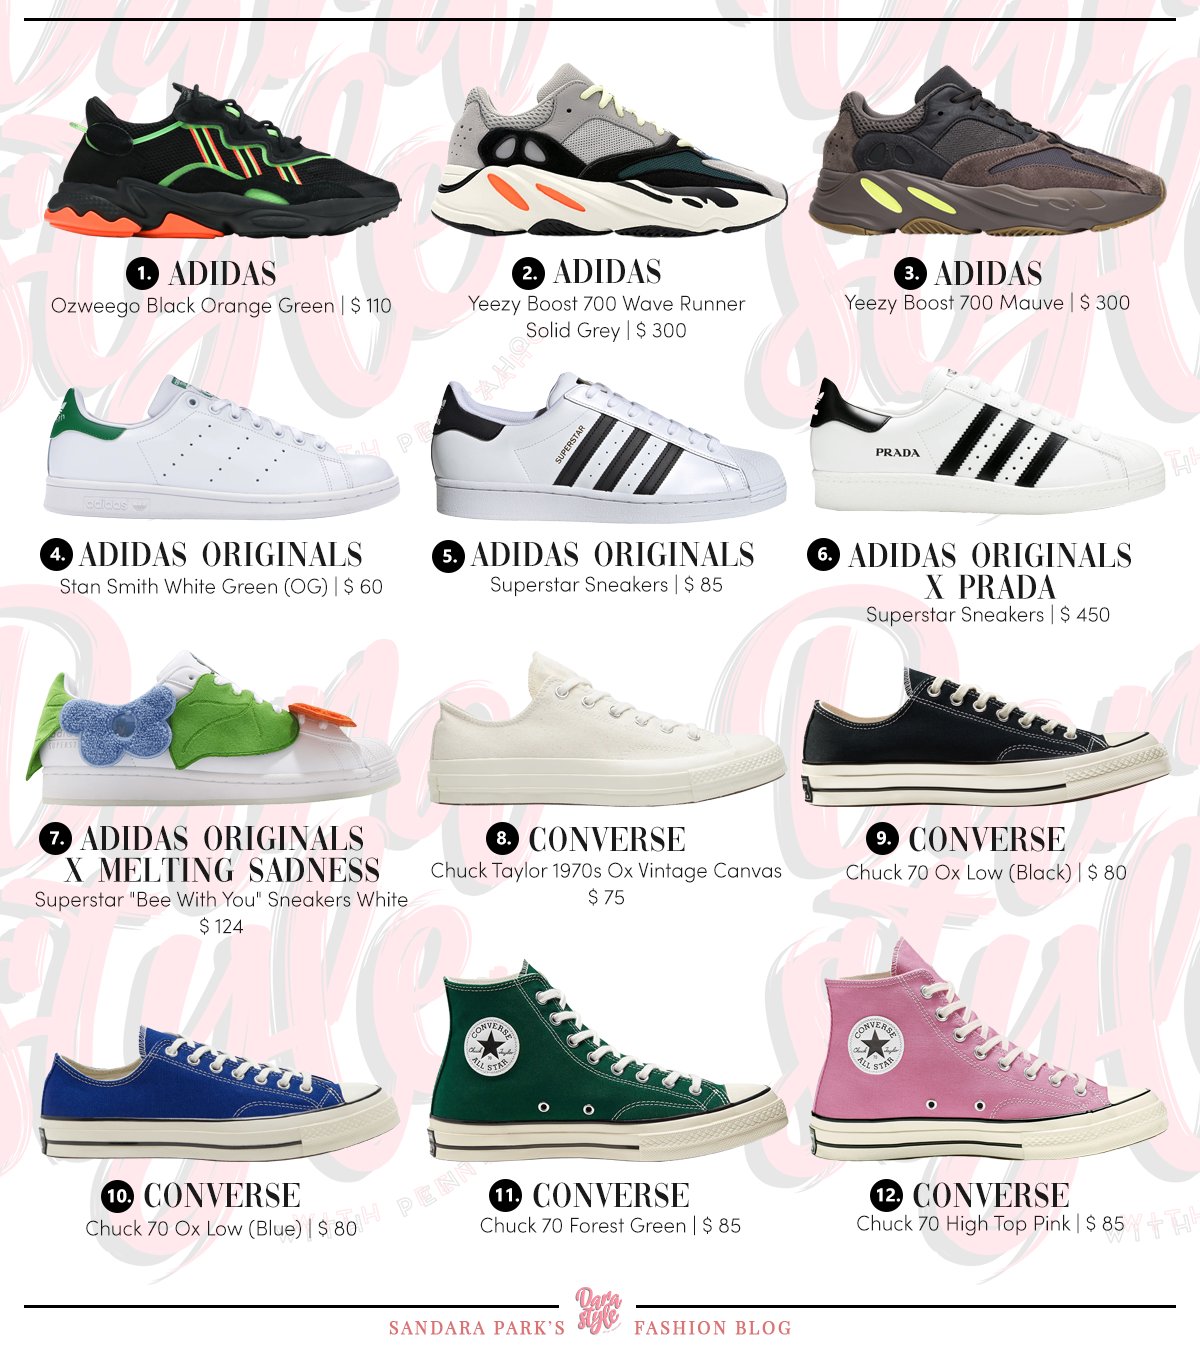 Dara Style on Twitter: "[COLLECTION] Mid-year Special Edition – #DARA Sneaker Compilation January 2021 to June / #ADIDAS / #BALENCIAGA / #REEBOK / #MAISONMARGIELA / #OFFWHITE / / #CARHARTT / #